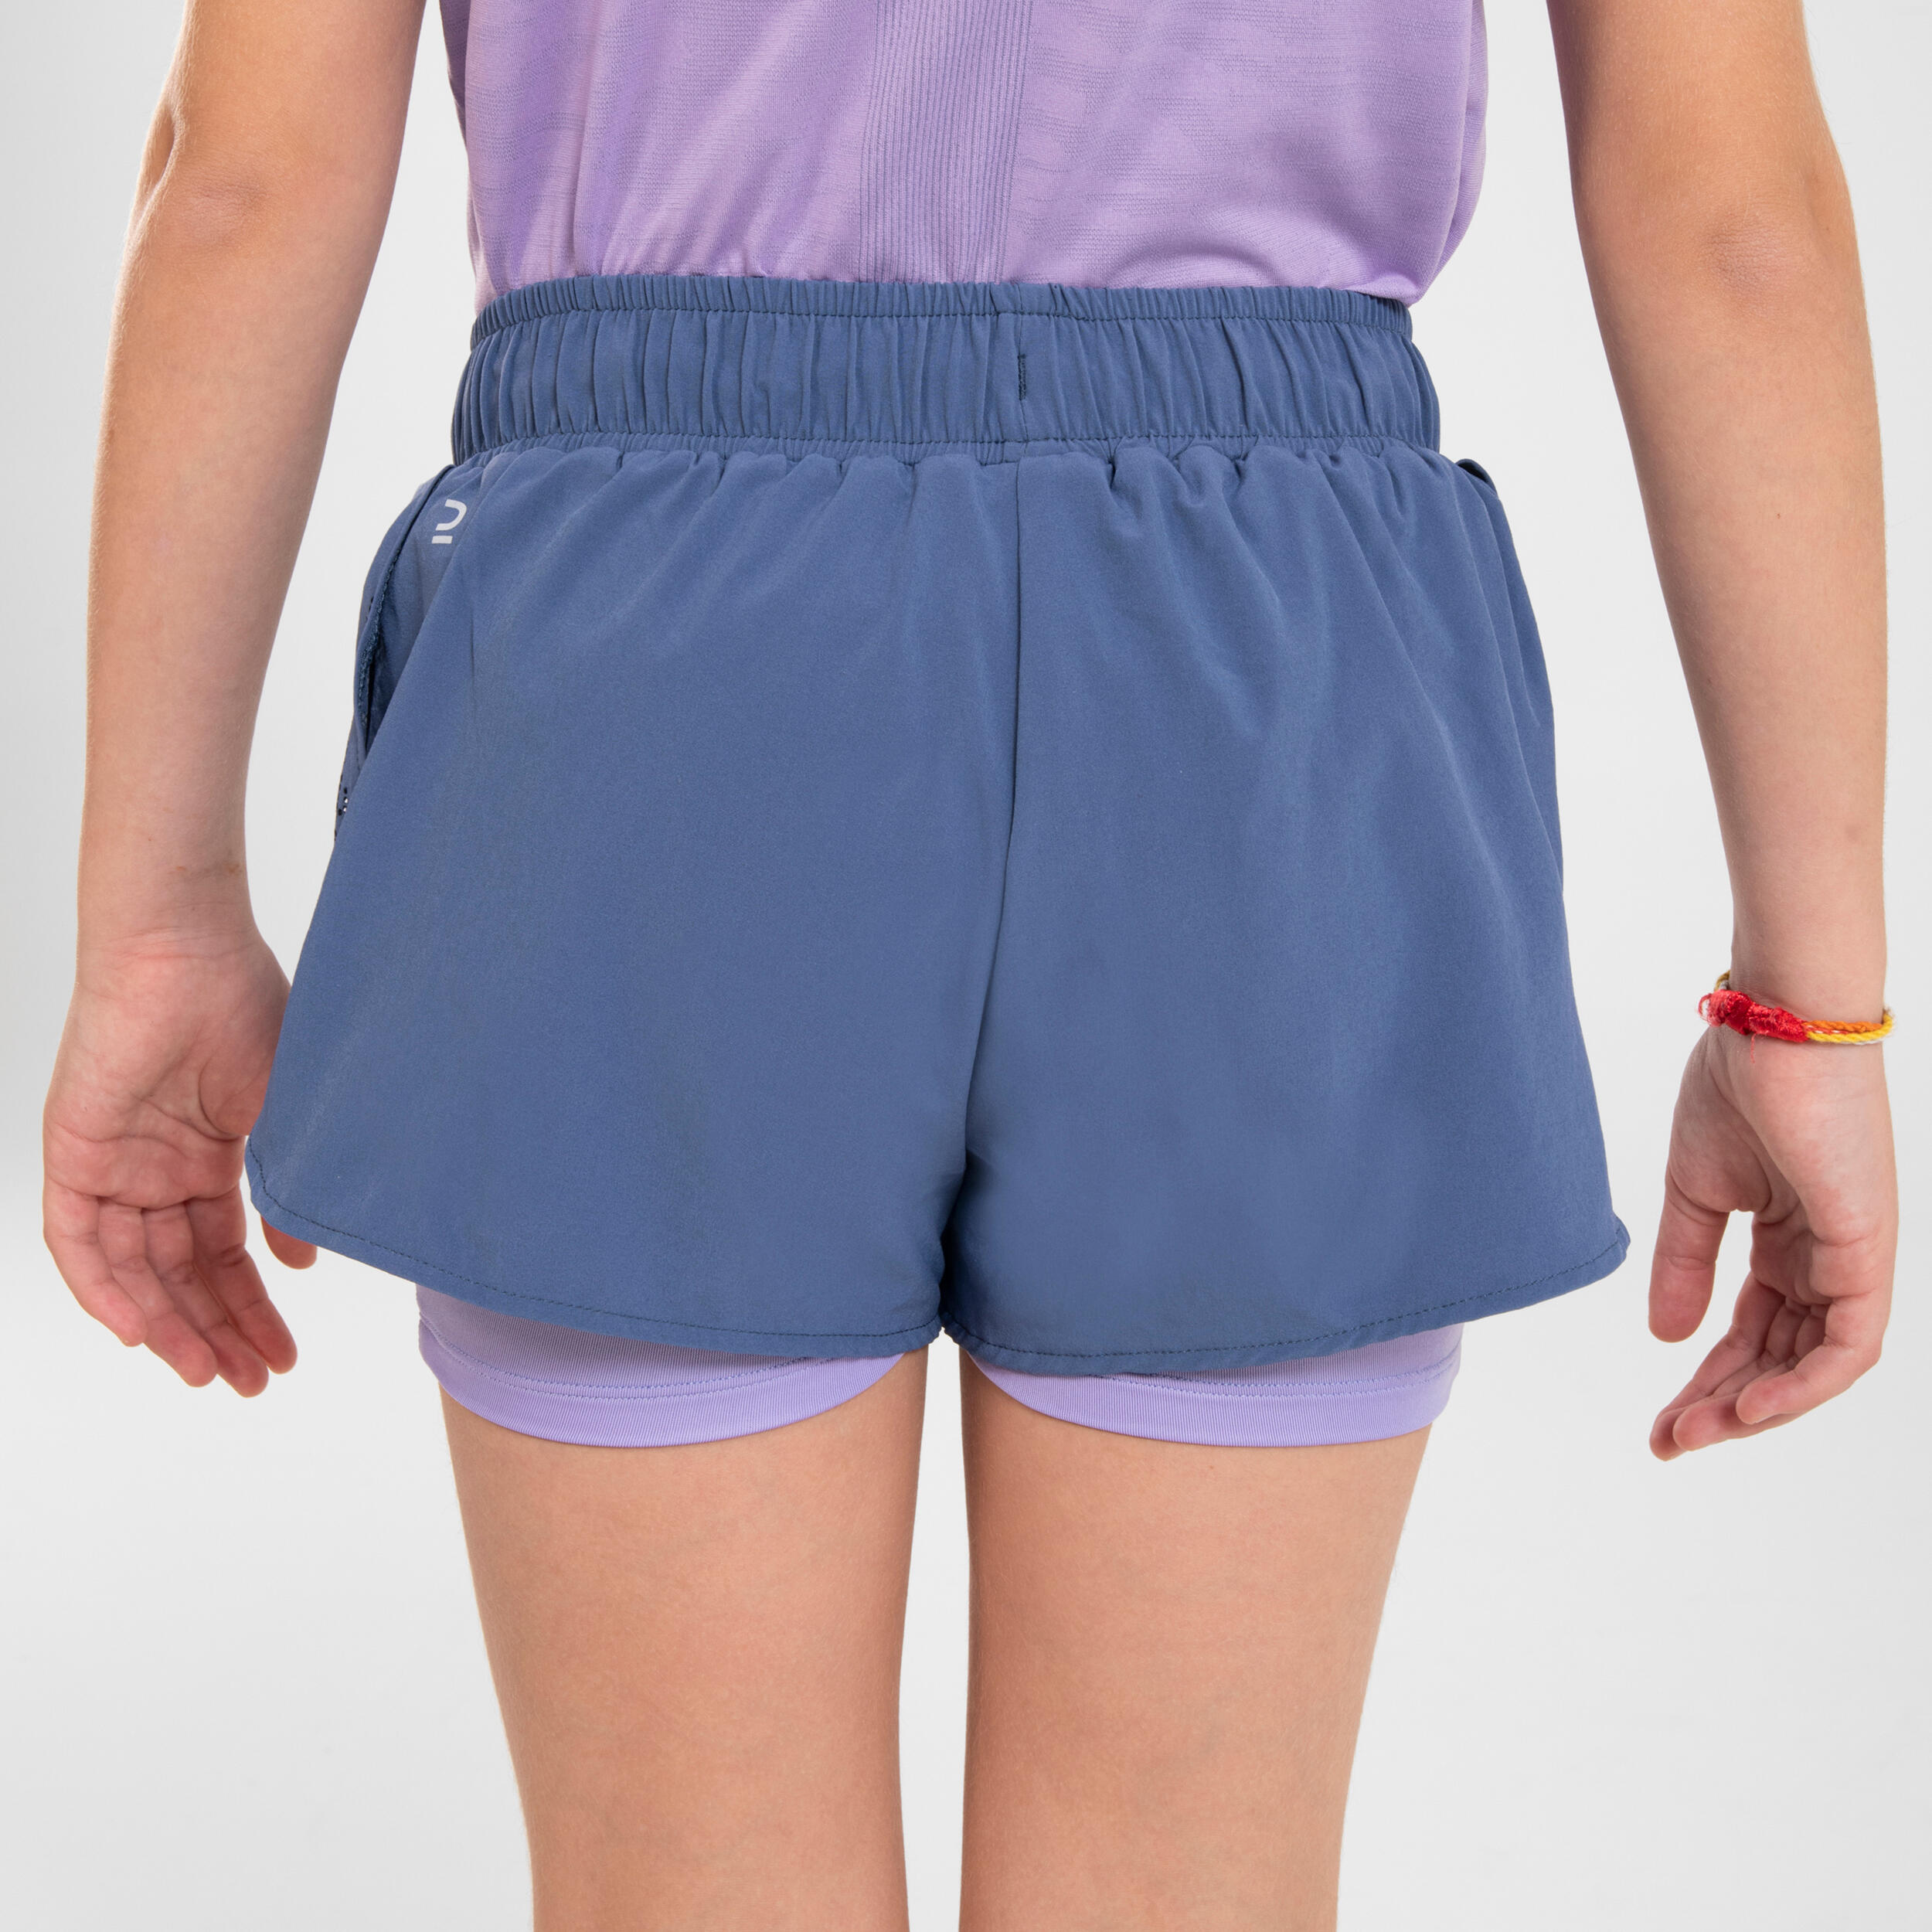 KIPRUN DRY+ girl's breathable 2-in-1 tight running shorts - denim and mauve 10/14